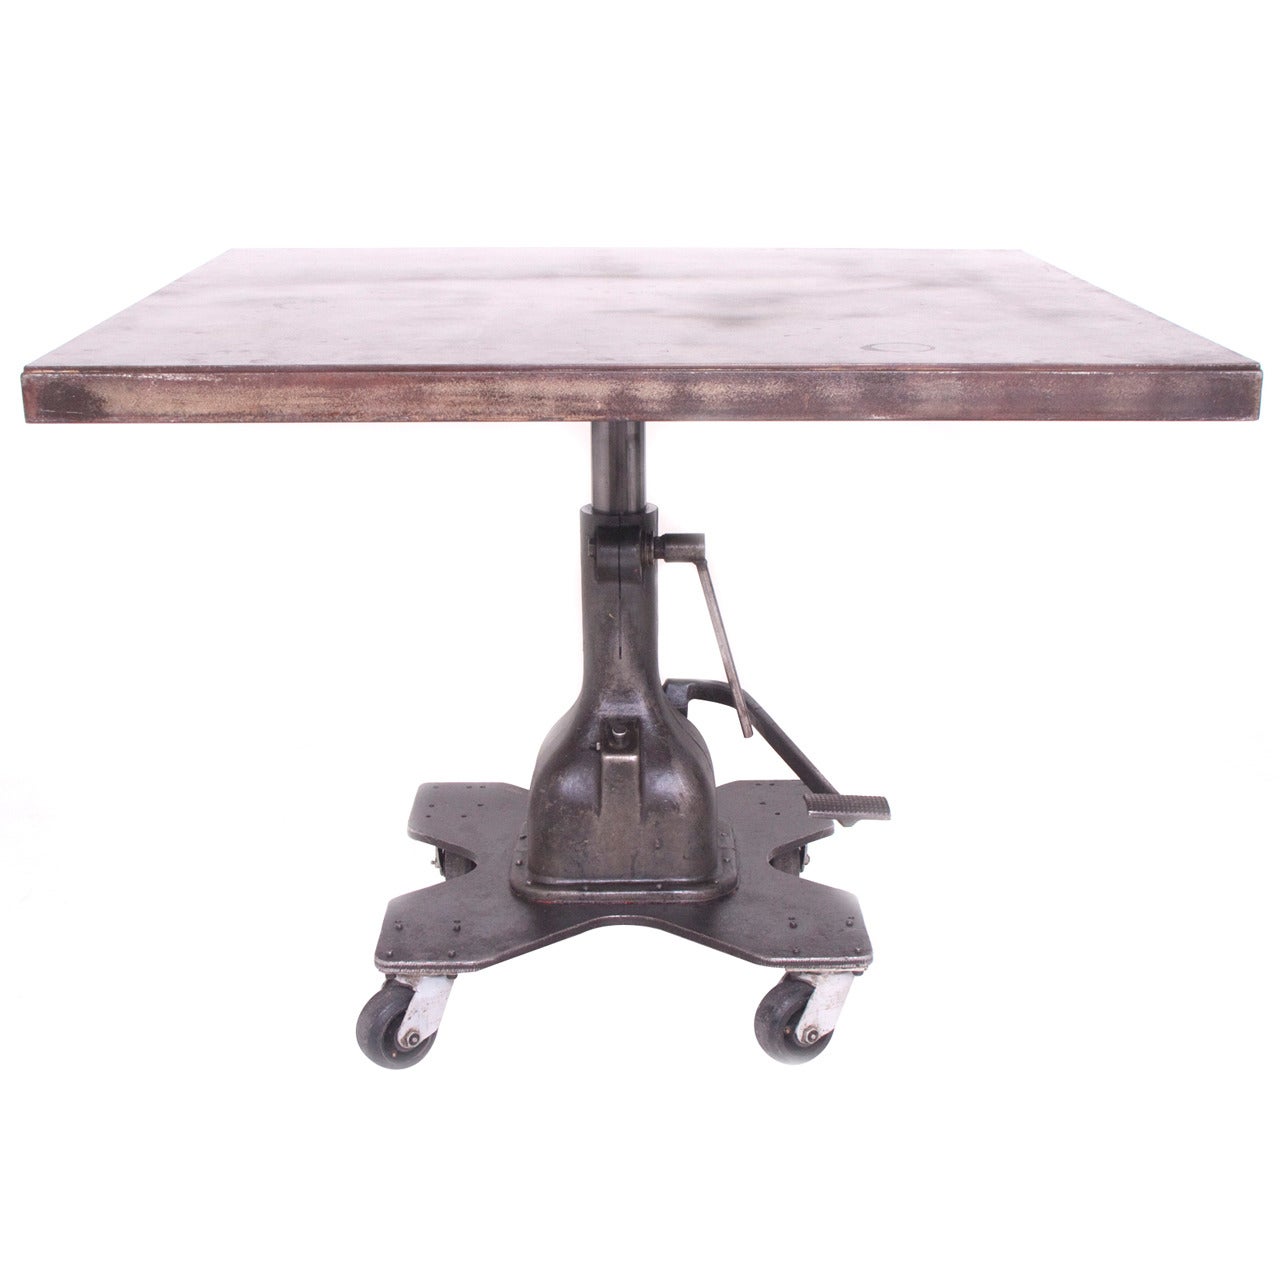 Industrial Adjustable Swivel Lift Dining or Work Table